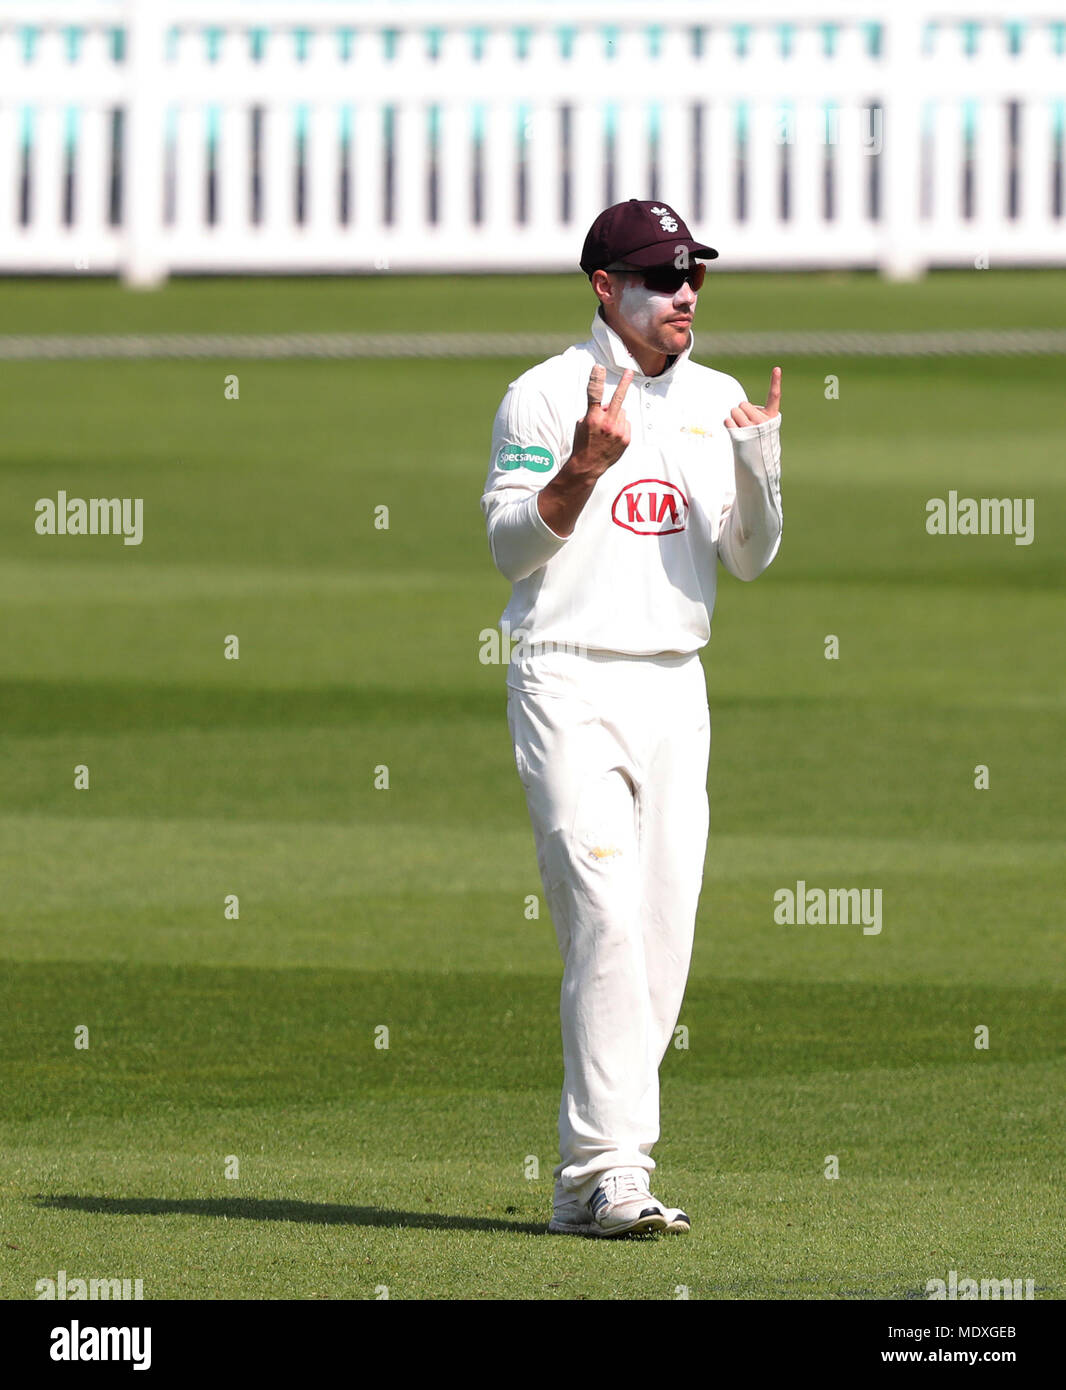 London, UK. 21st Apr, 2018. Surrey captain Rory Burns during Day Two of the Division One Specsavers County Championship match between Surrey and Hampshire at the Kia Oval Cricket Ground, in London, England. Credit: European Sports Photographic Agency/Alamy Live News Stock Photo